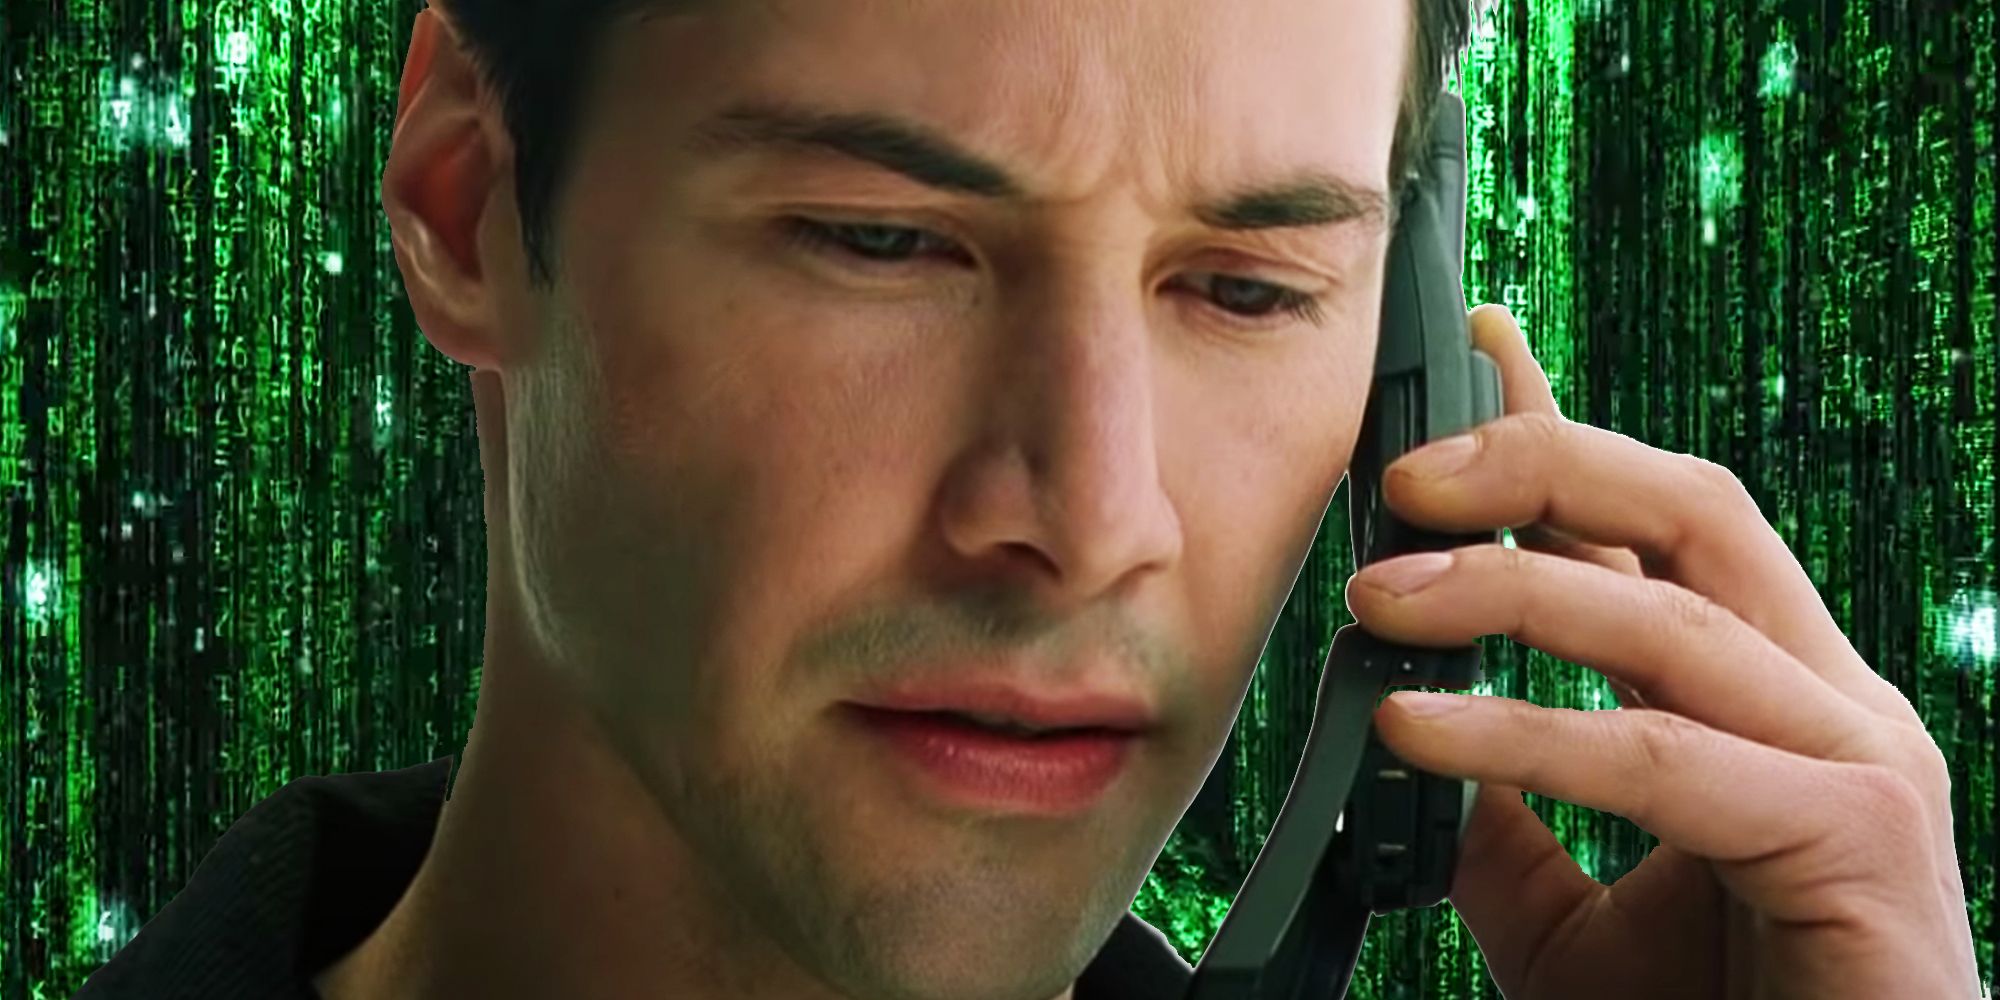 Keanu Reeves as Neo from The Matrix holding a phone up to his ear